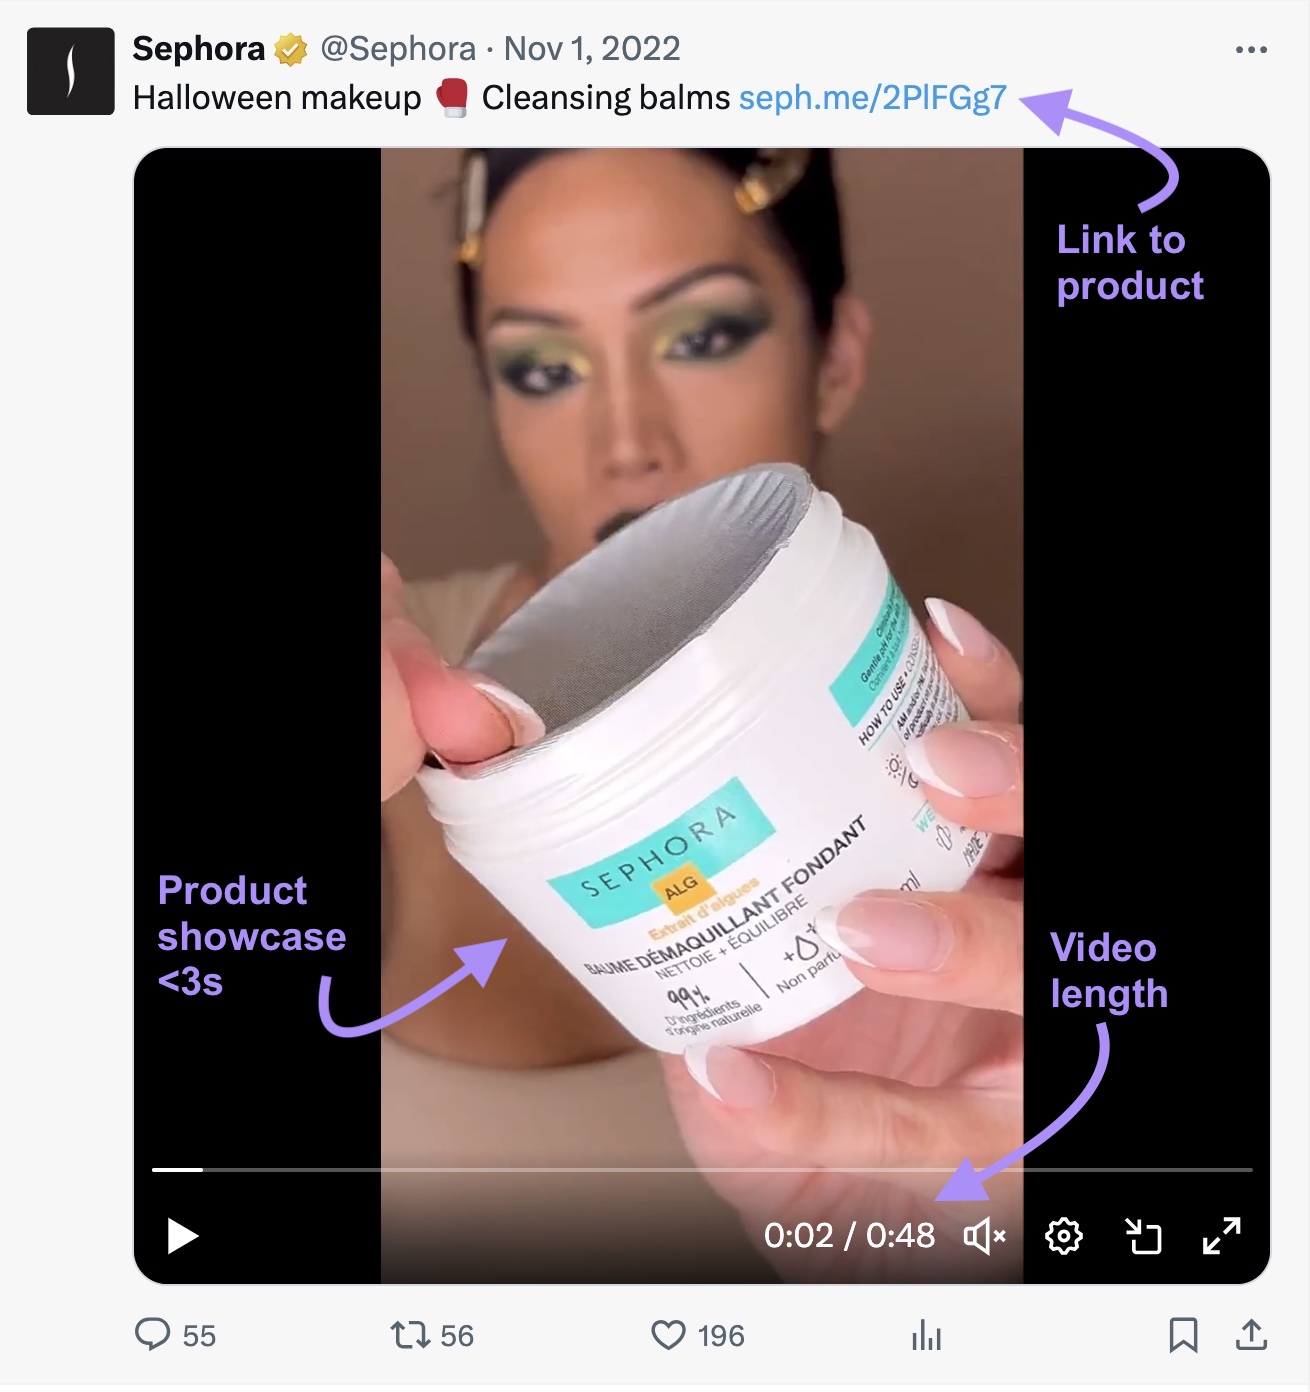 Sephora's video connected  X (formerly Twitter), with nexus  to a product, merchandise  showcase and video magnitude   elements highlighted